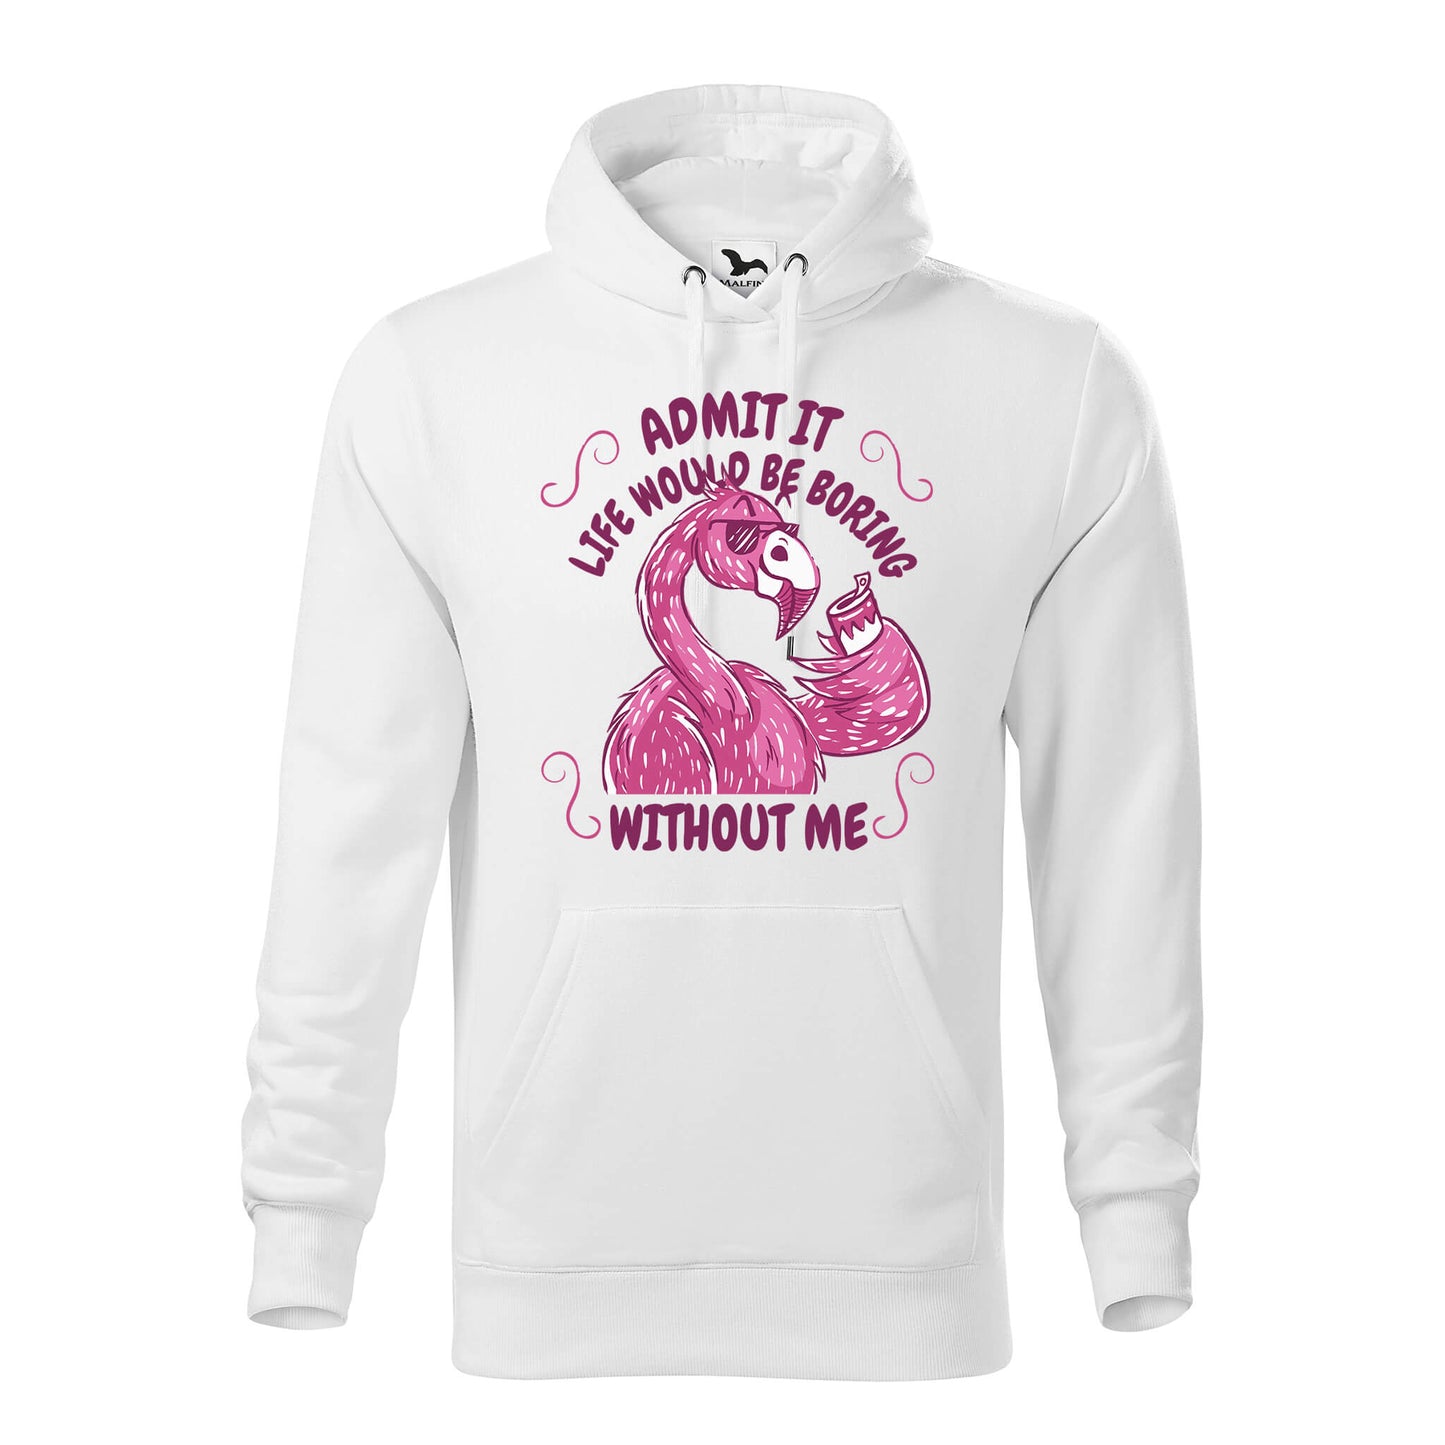 Life would be boring without me hoodie - rvdesignprint